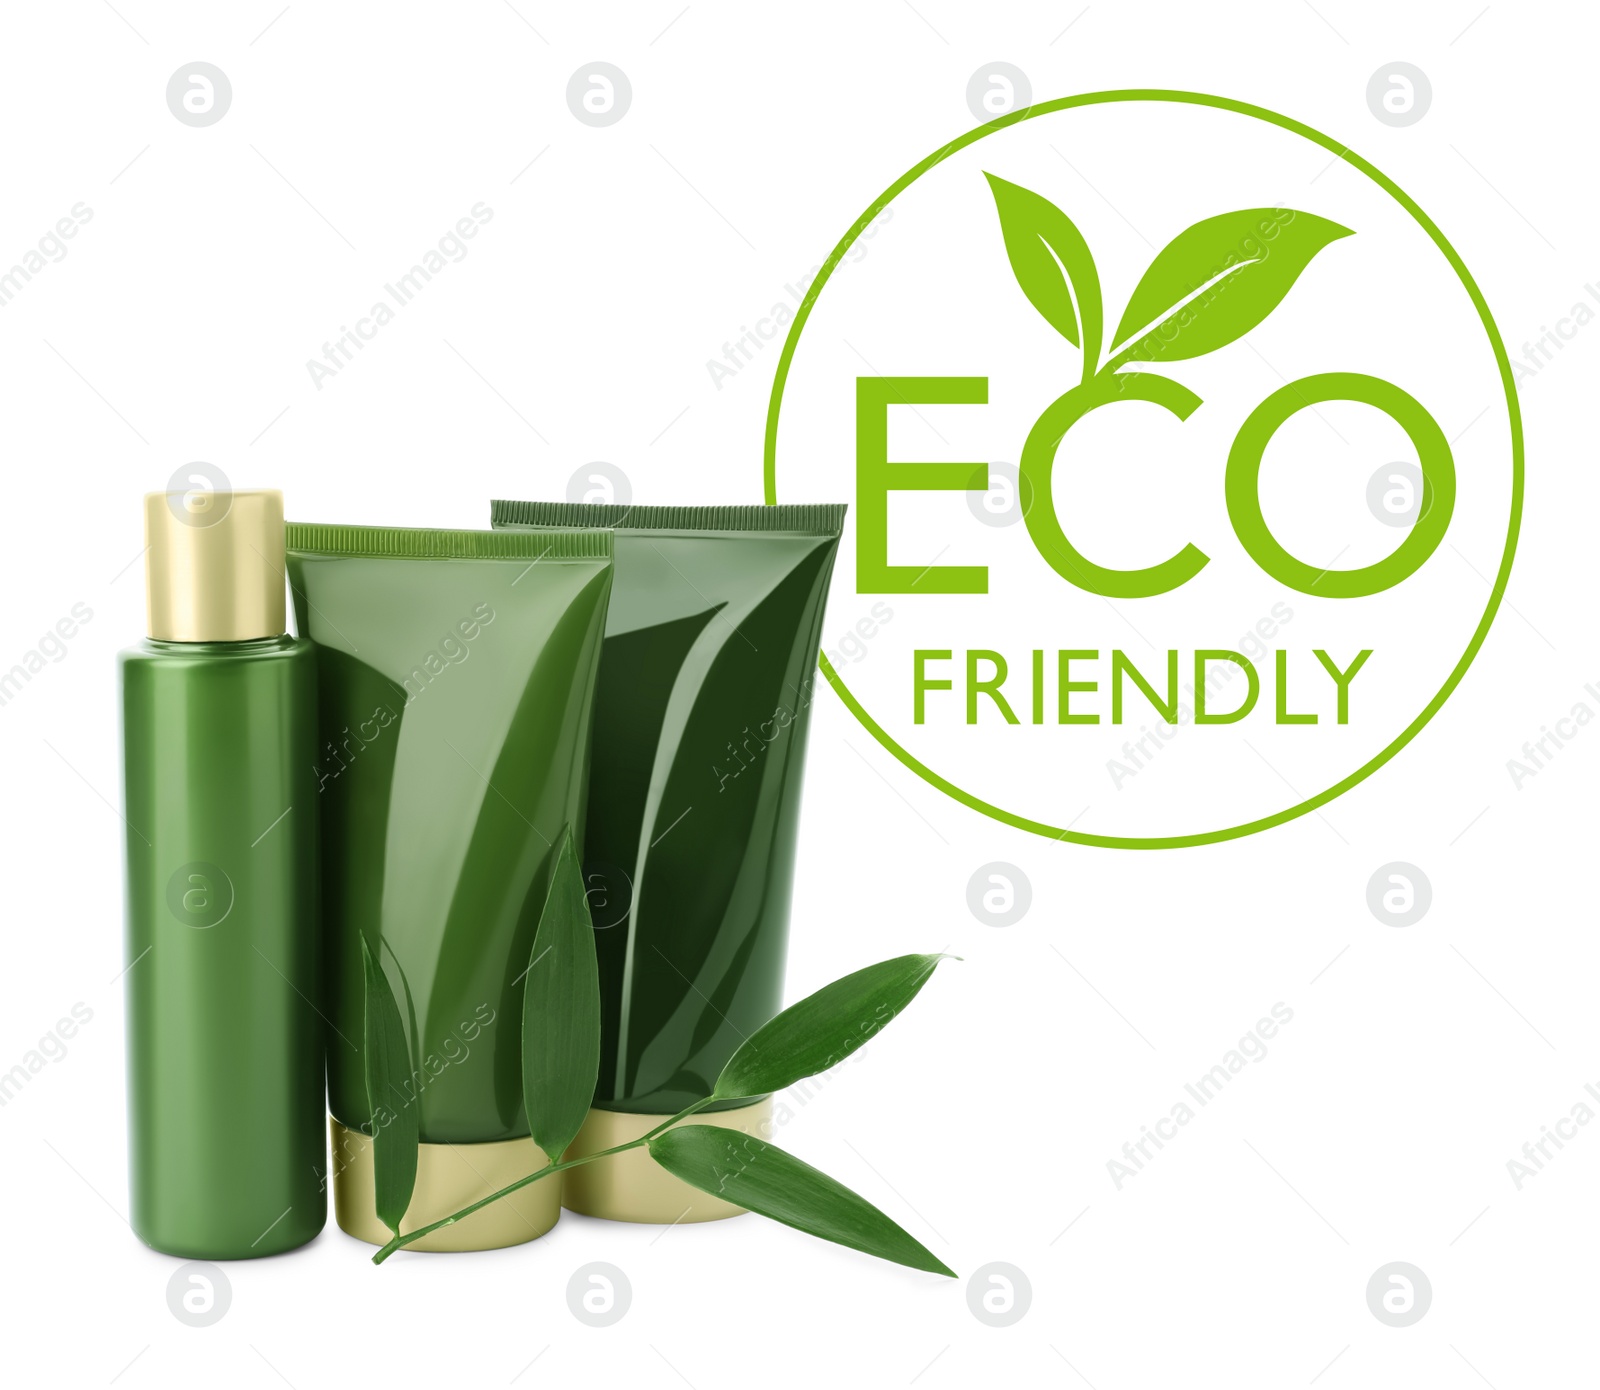 Image of Organic eco friendly cosmetic products on white background